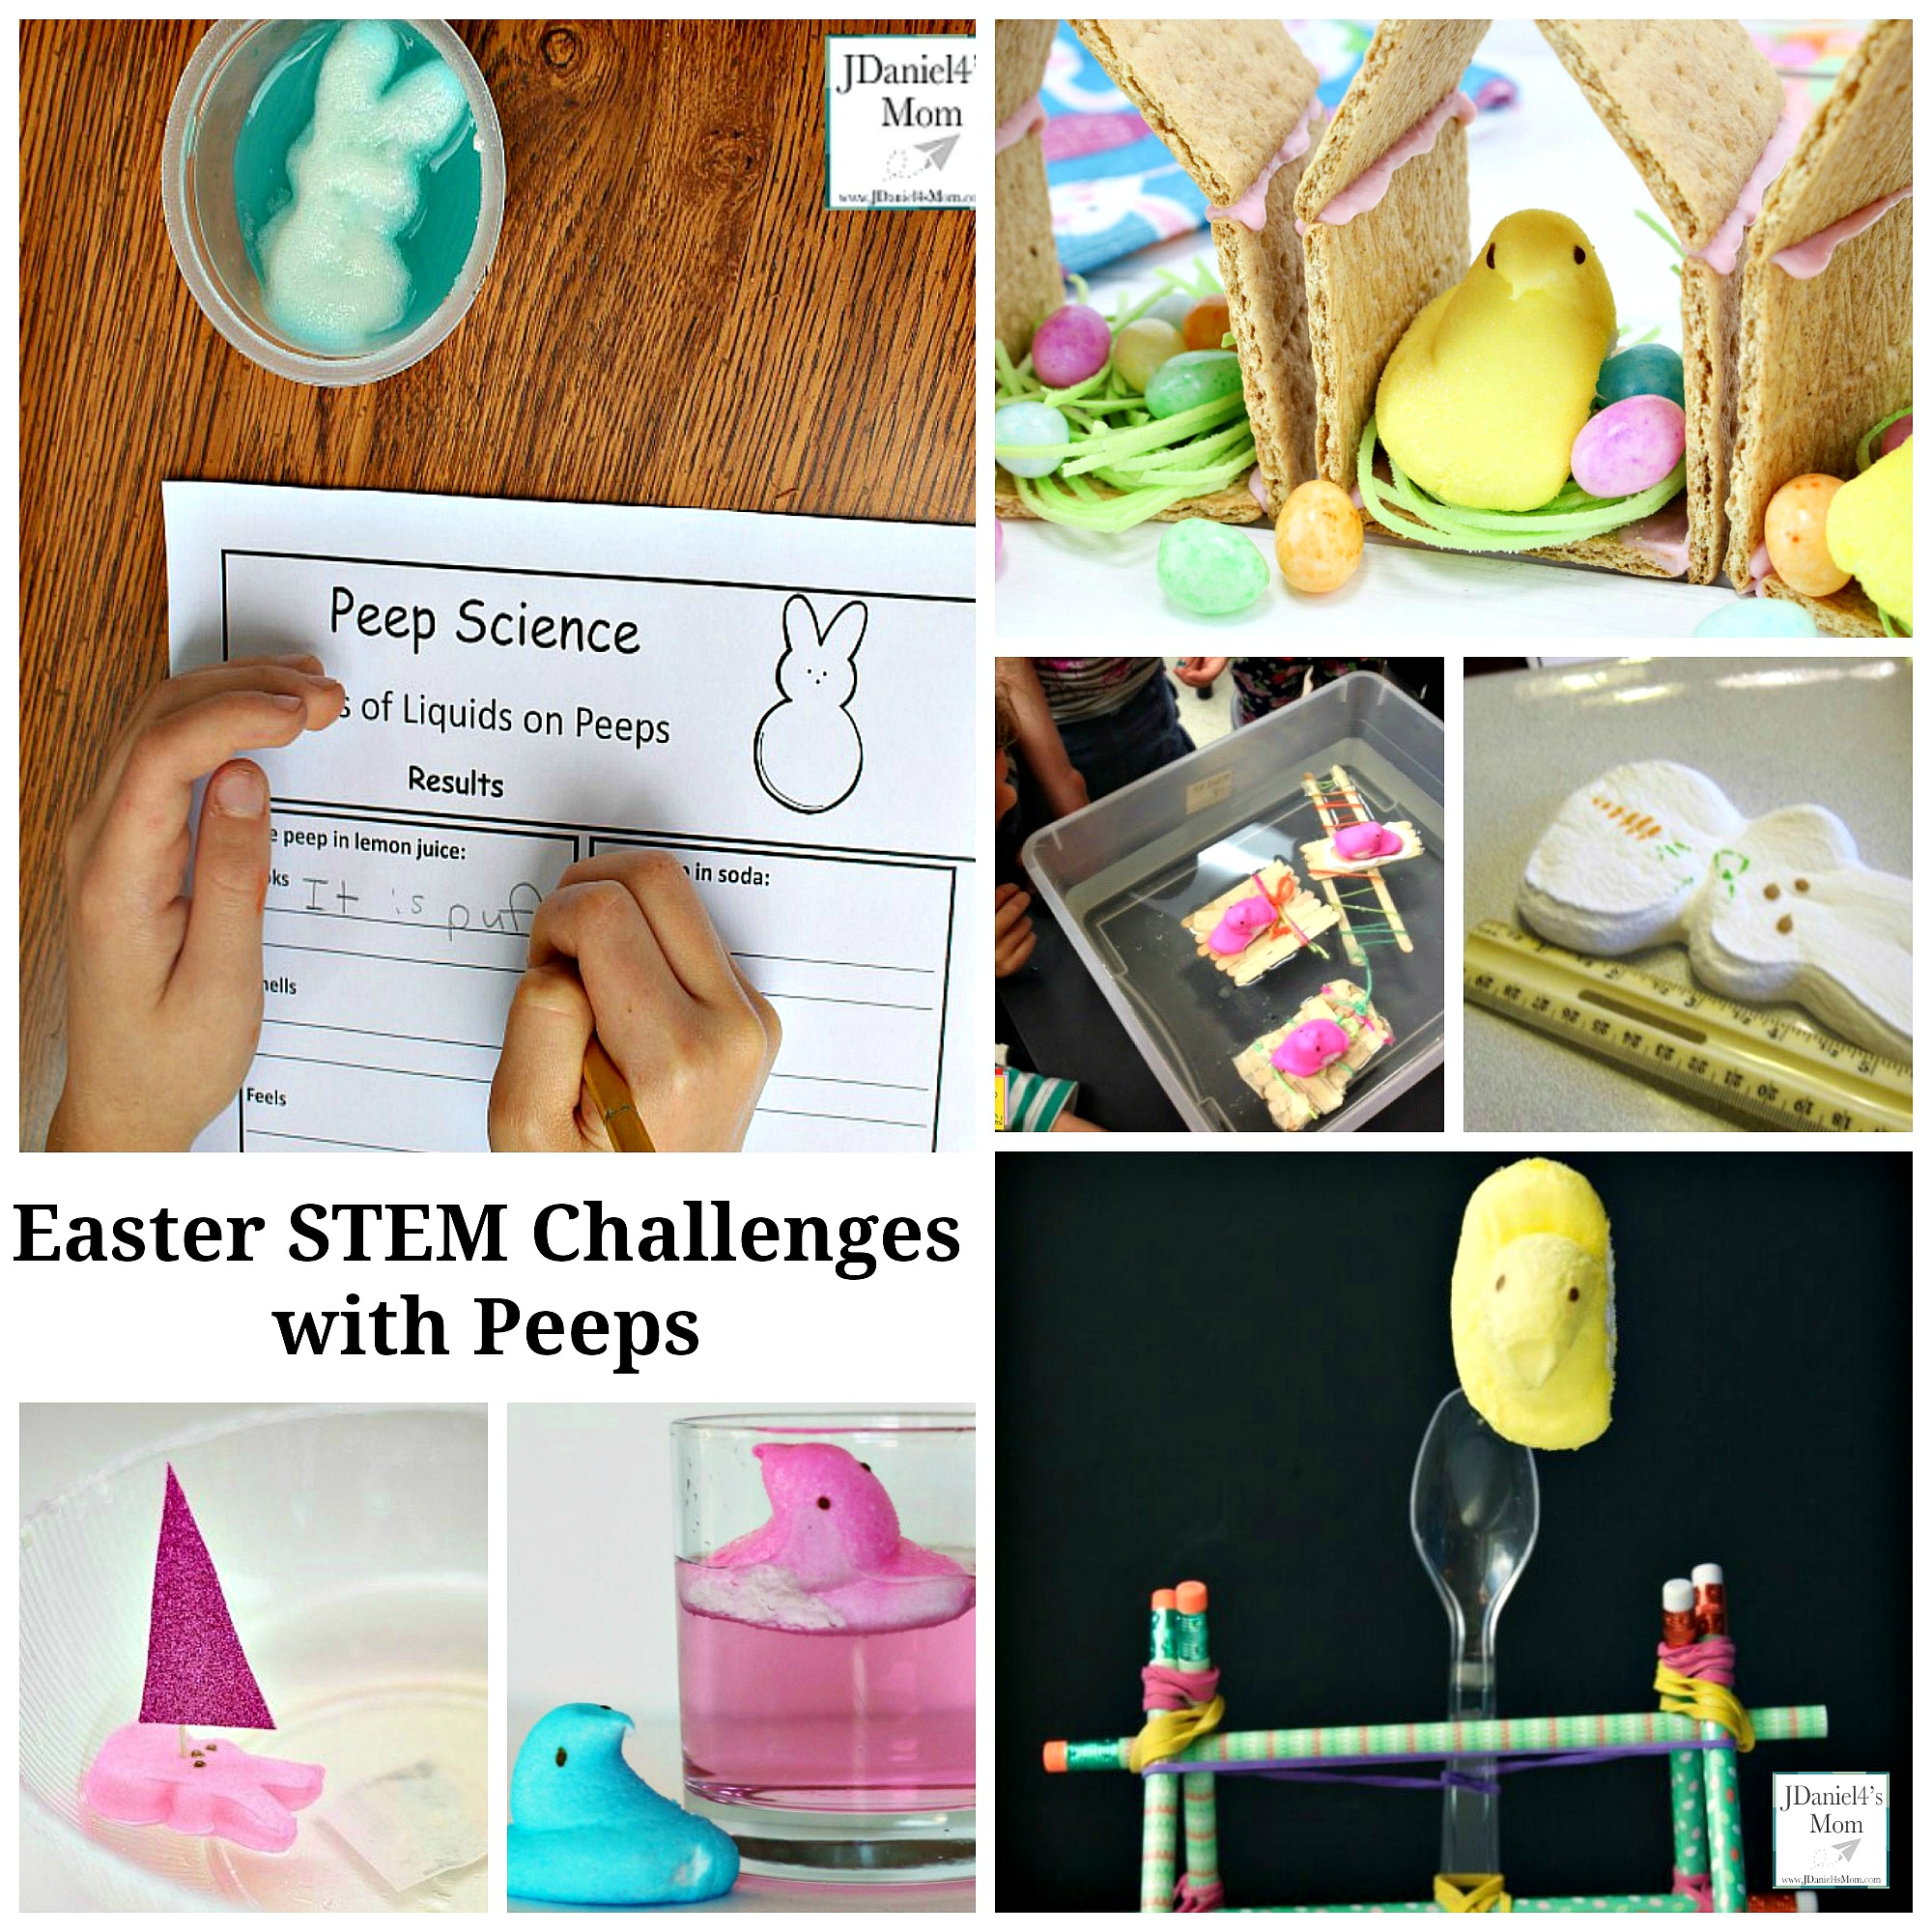 Easter STEM Challenges with Peeps